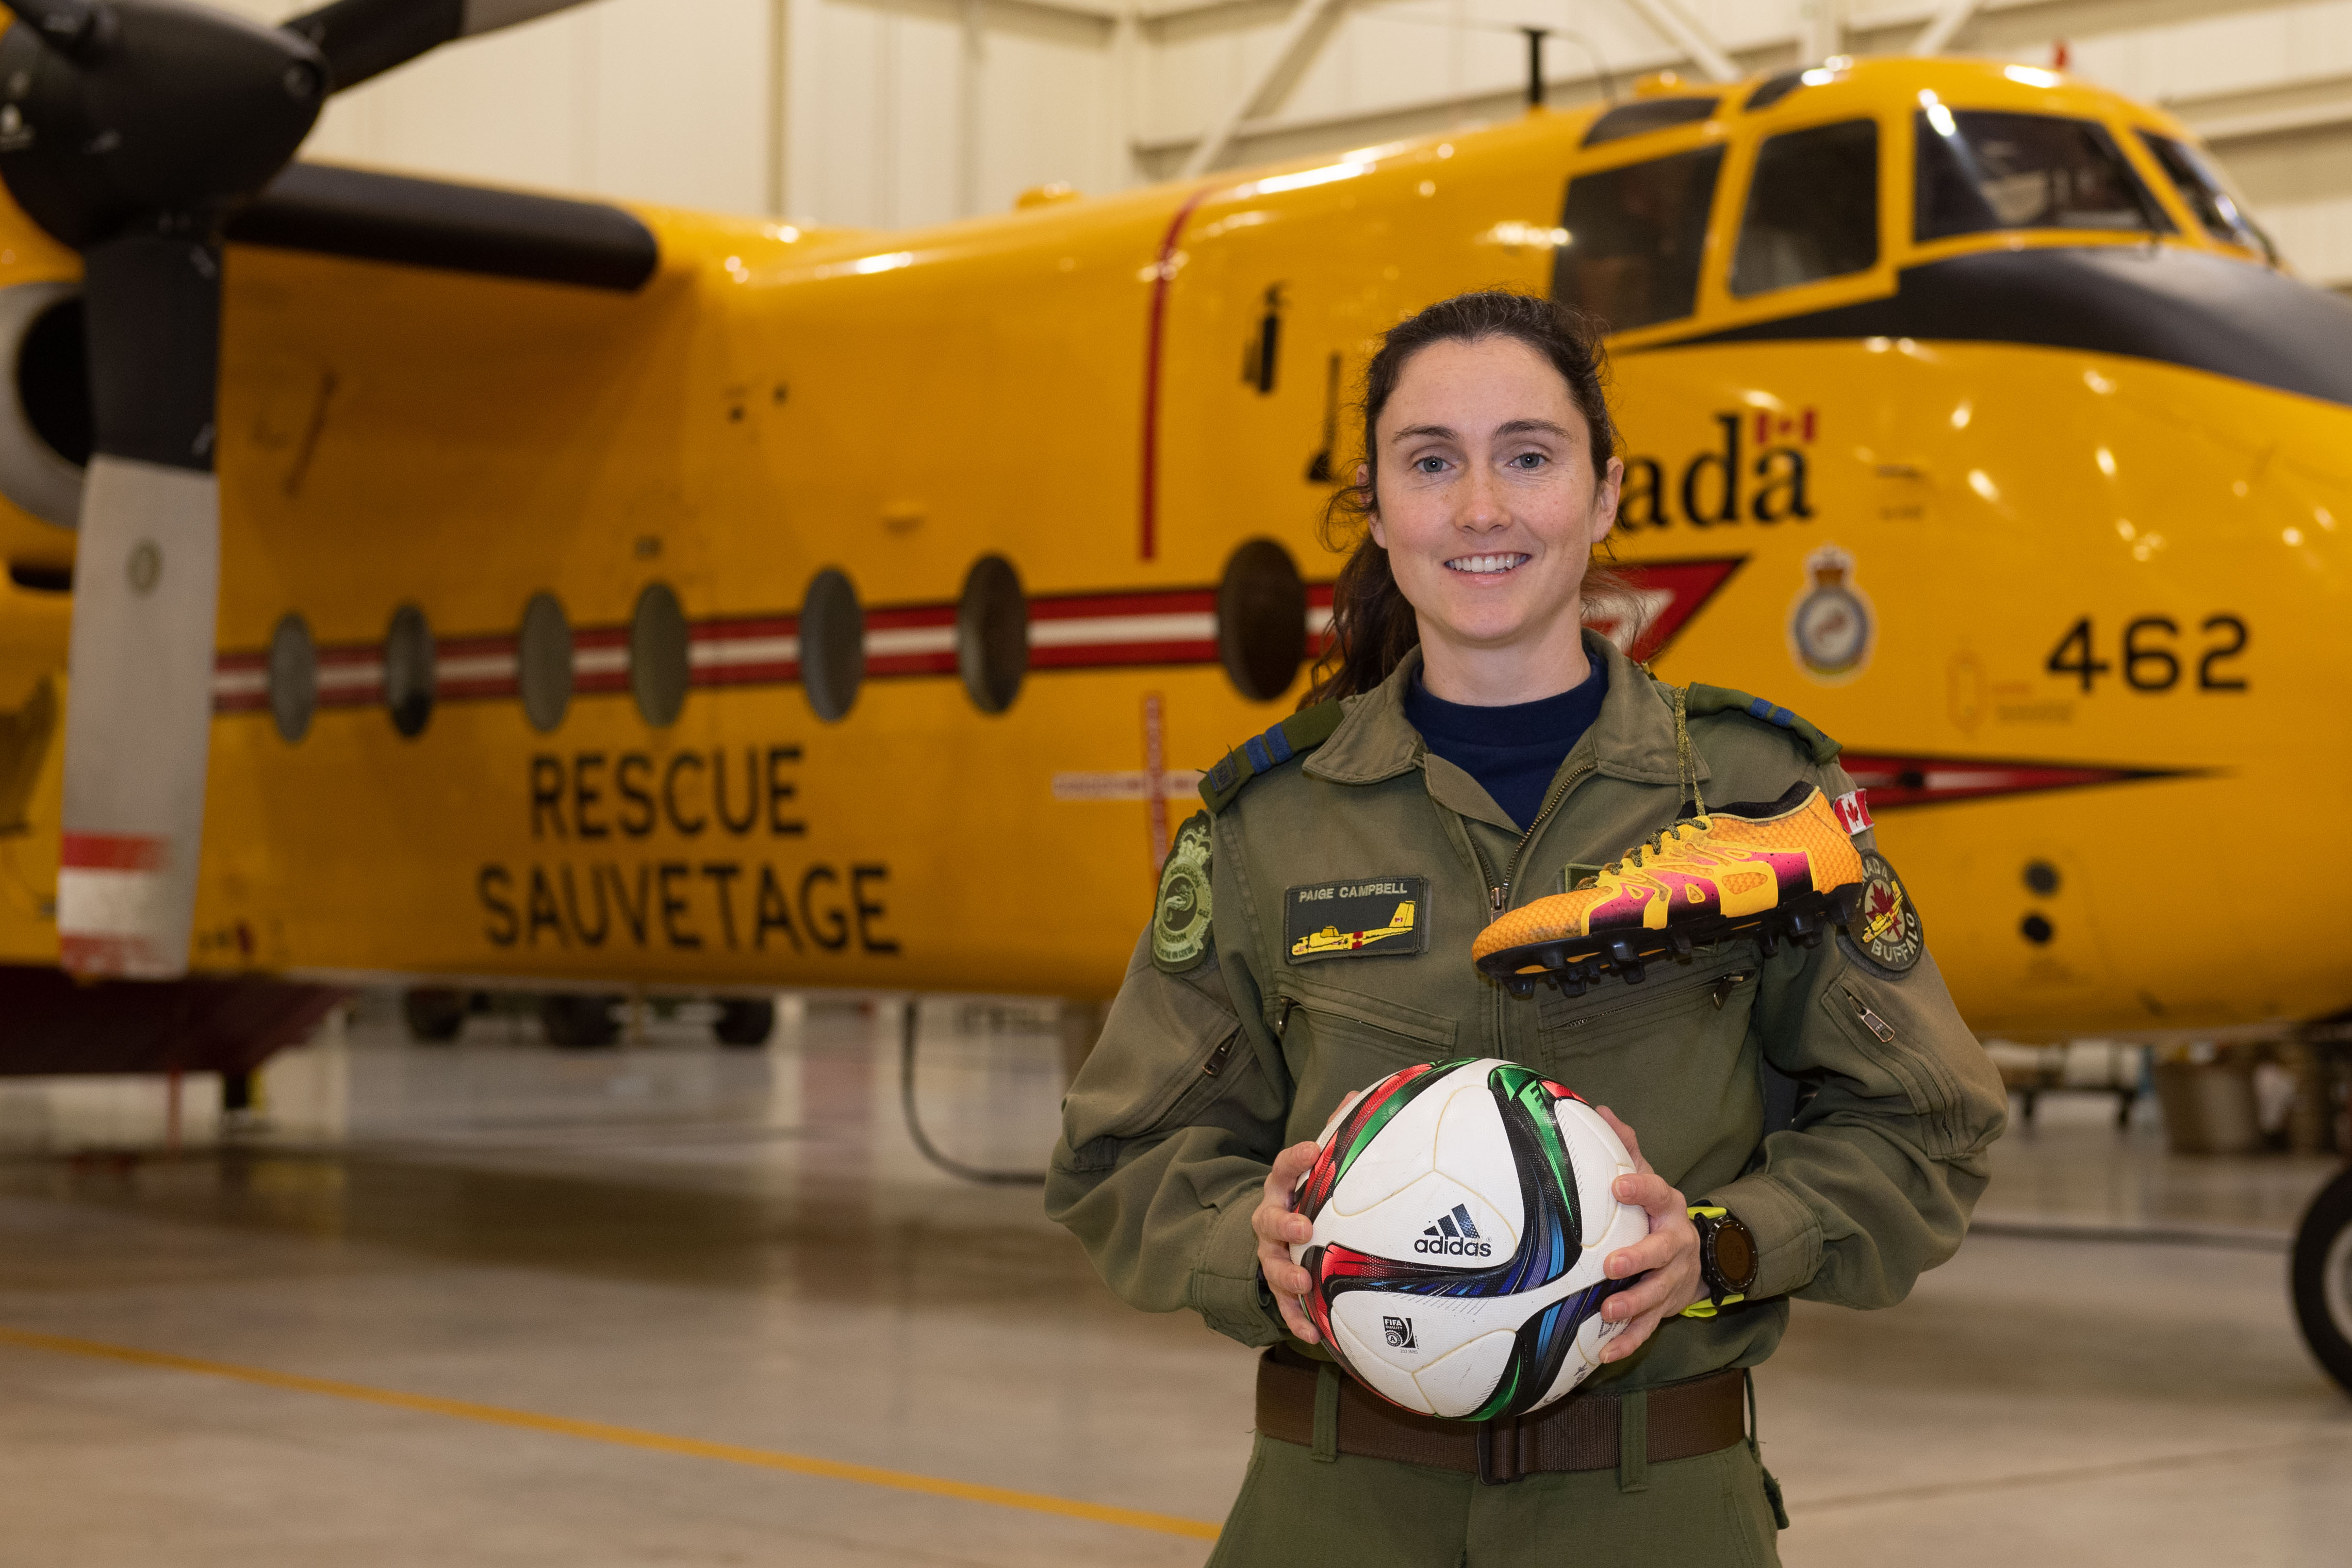 RCAF Female Athlete of the Year, Captain Paige Campbell, an Air Combat Systems Officer with 442 Transport and Rescue Squadron, at 19 Wing Comox, poses in front of a CC-115 Buffalo search and rescue aircraft at 19 Wing Comox, British Columbia, on December 3, 2020. PHOTO: Corporal Joey Beaudin